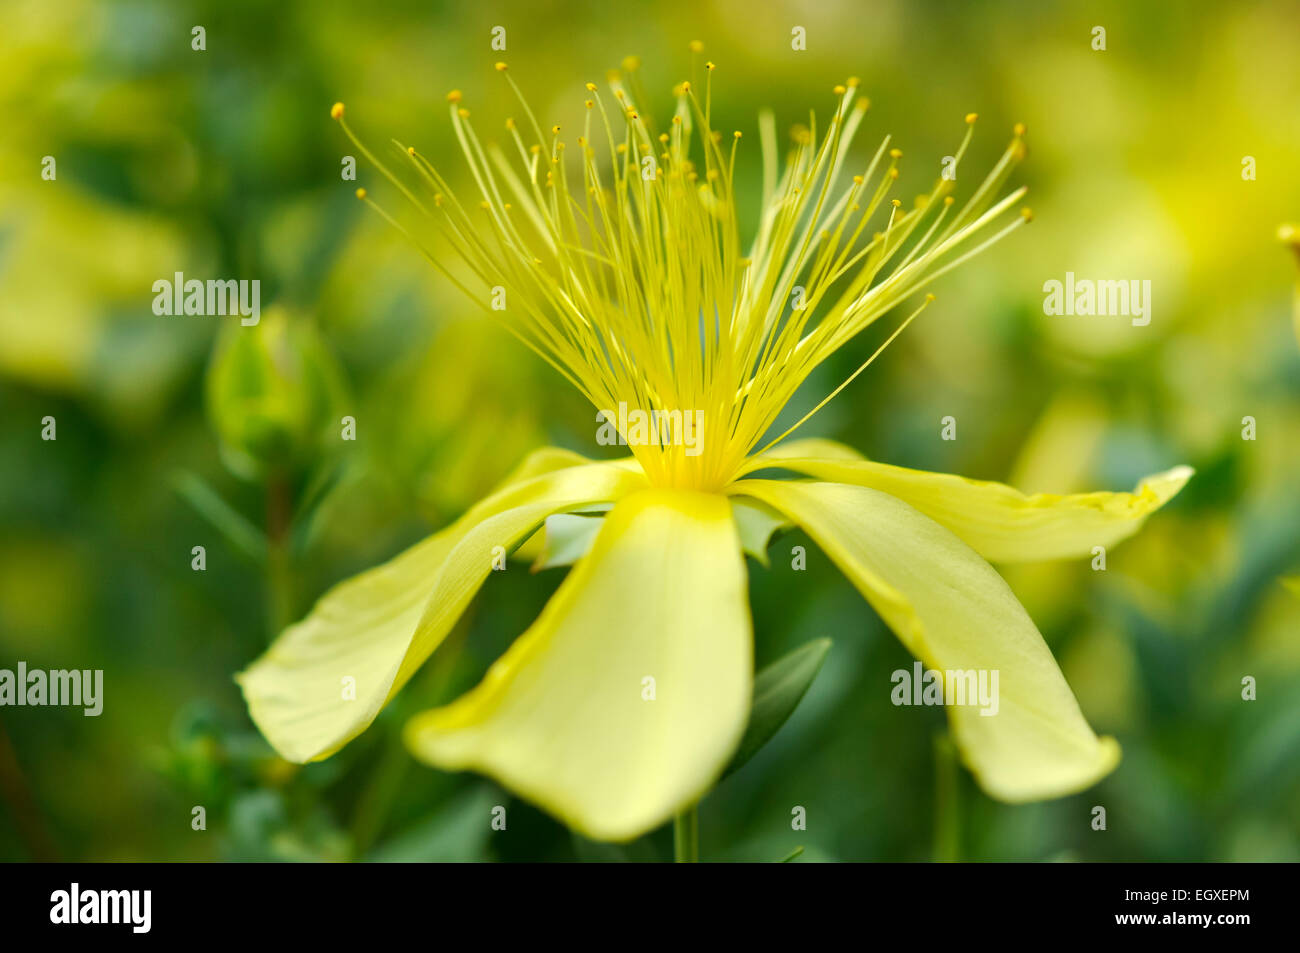 Hypericum olympicum 'Citrinum' with pale yellow petals and long stamens. Stock Photo